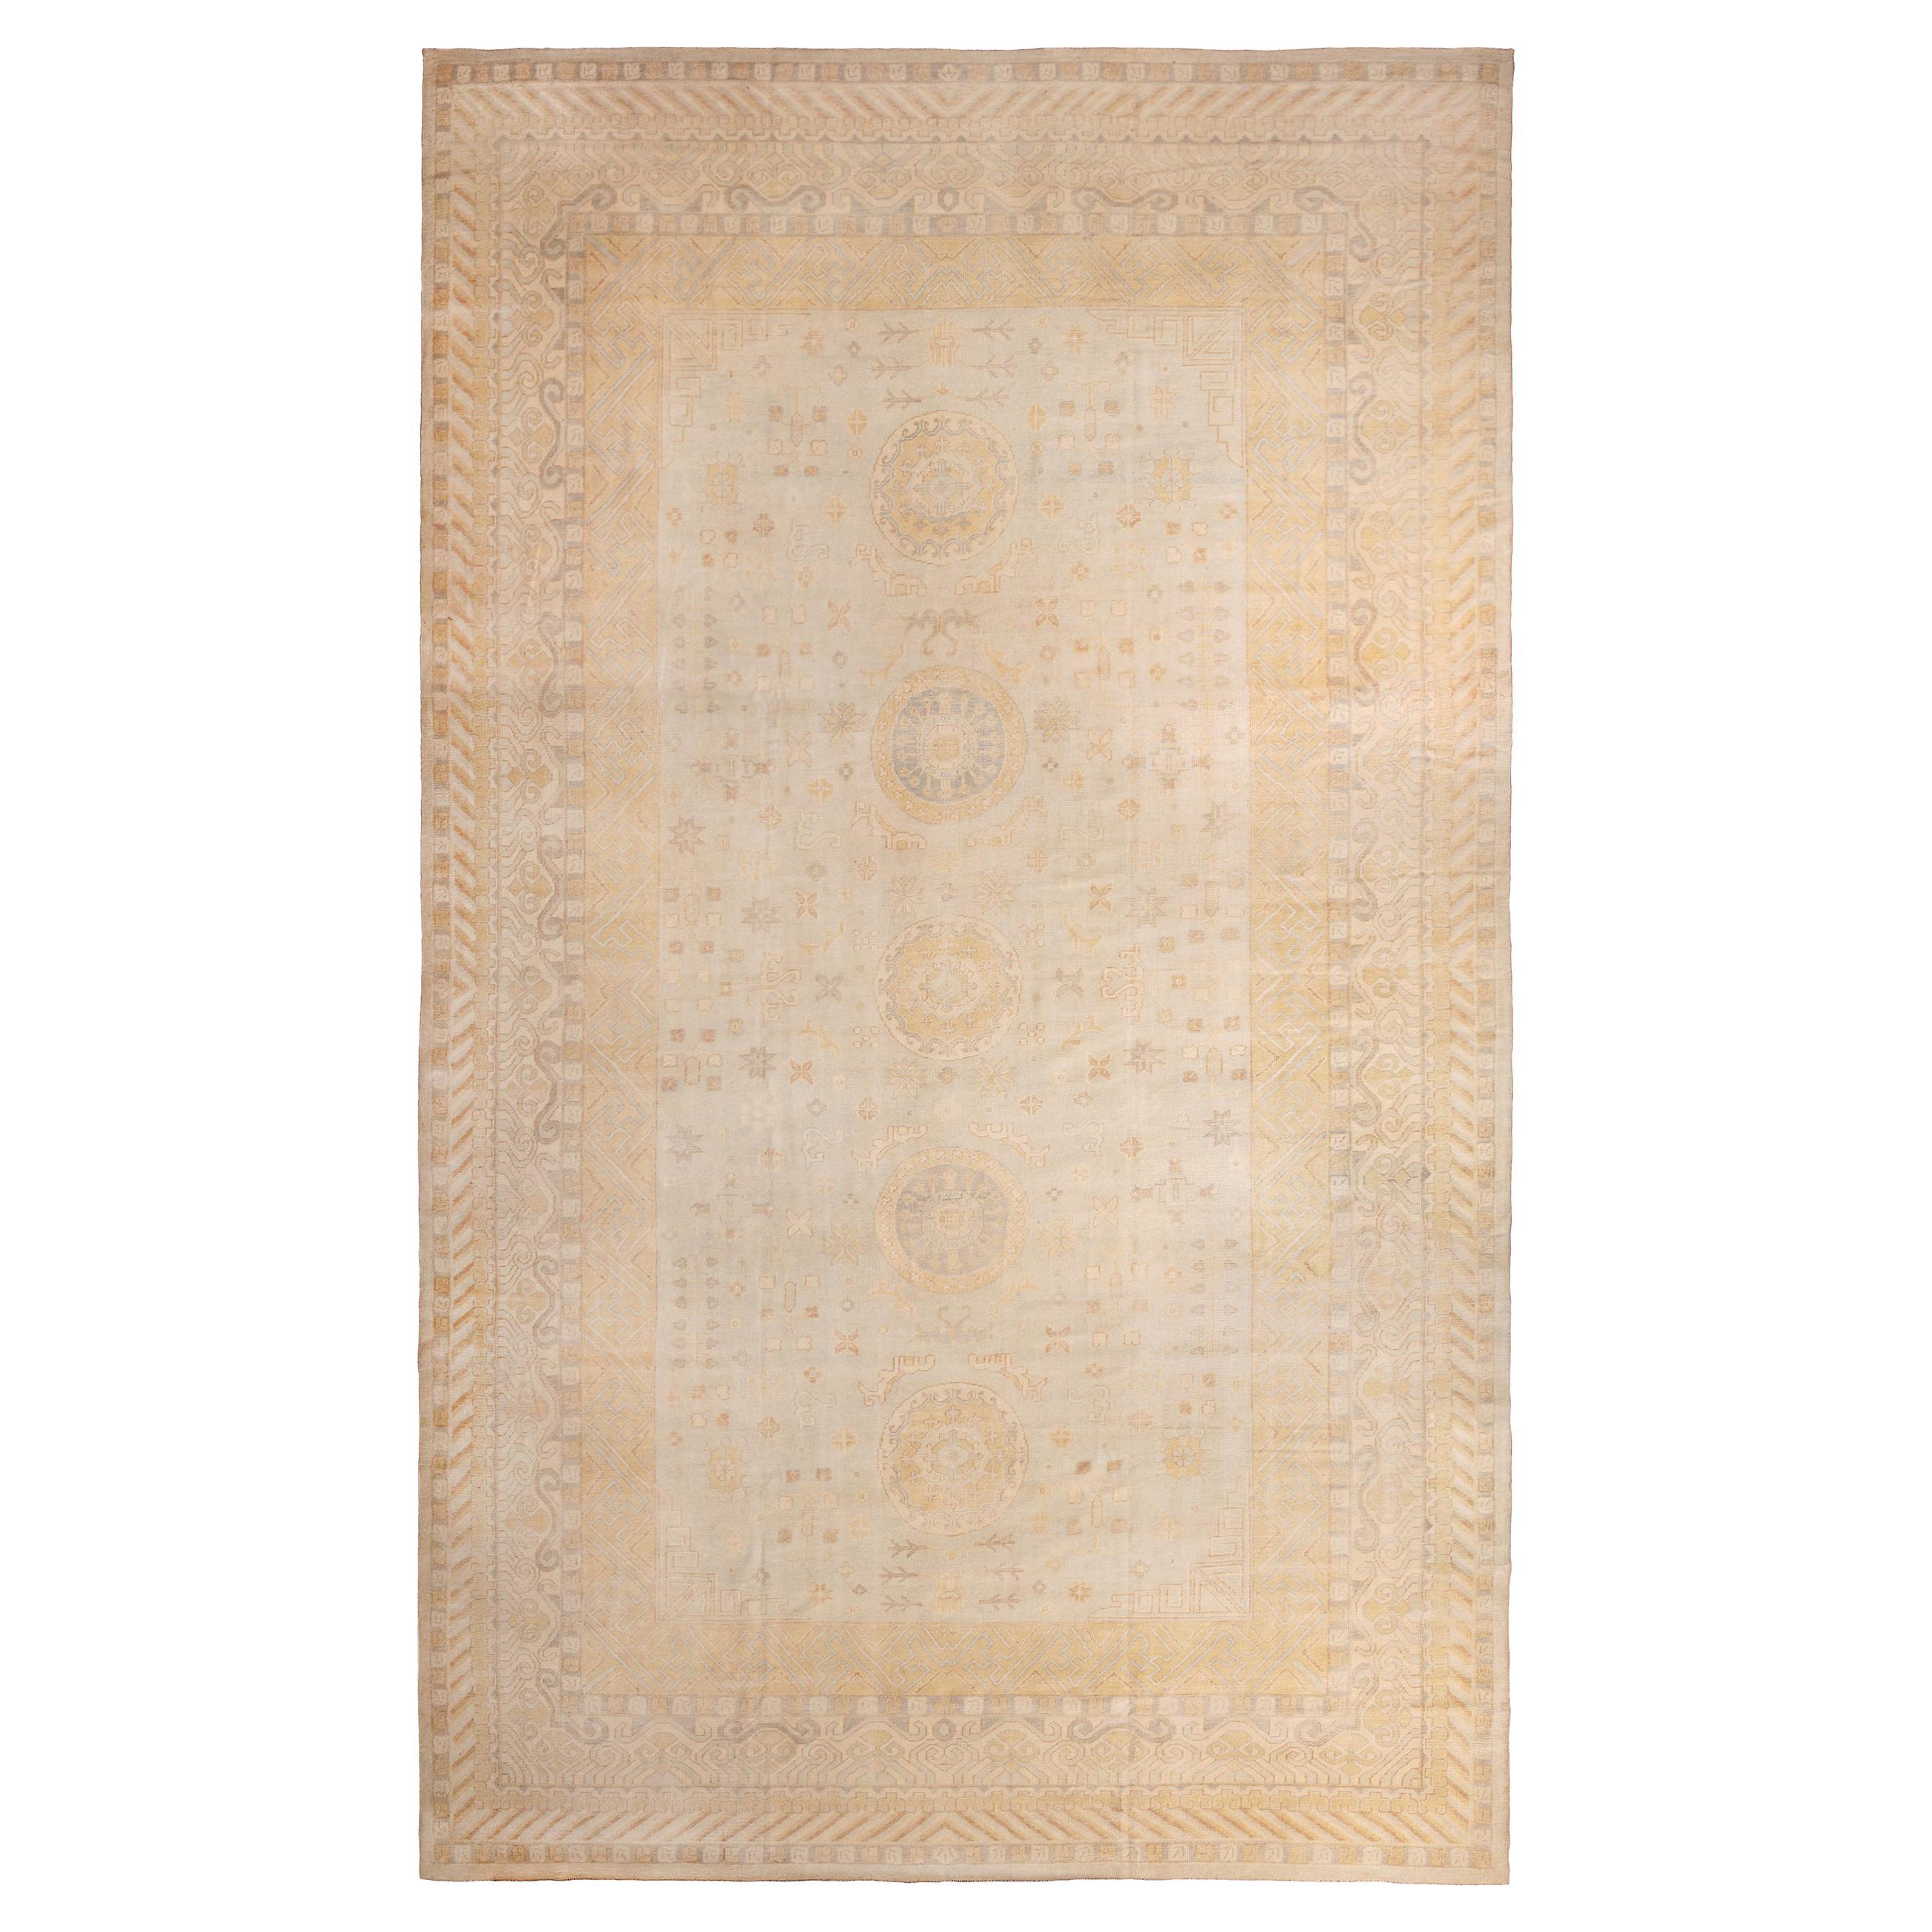 Rug & Kilim’s Khotan Style Palace Rug in Blue, Beige Yellow Medallion Pattern For Sale